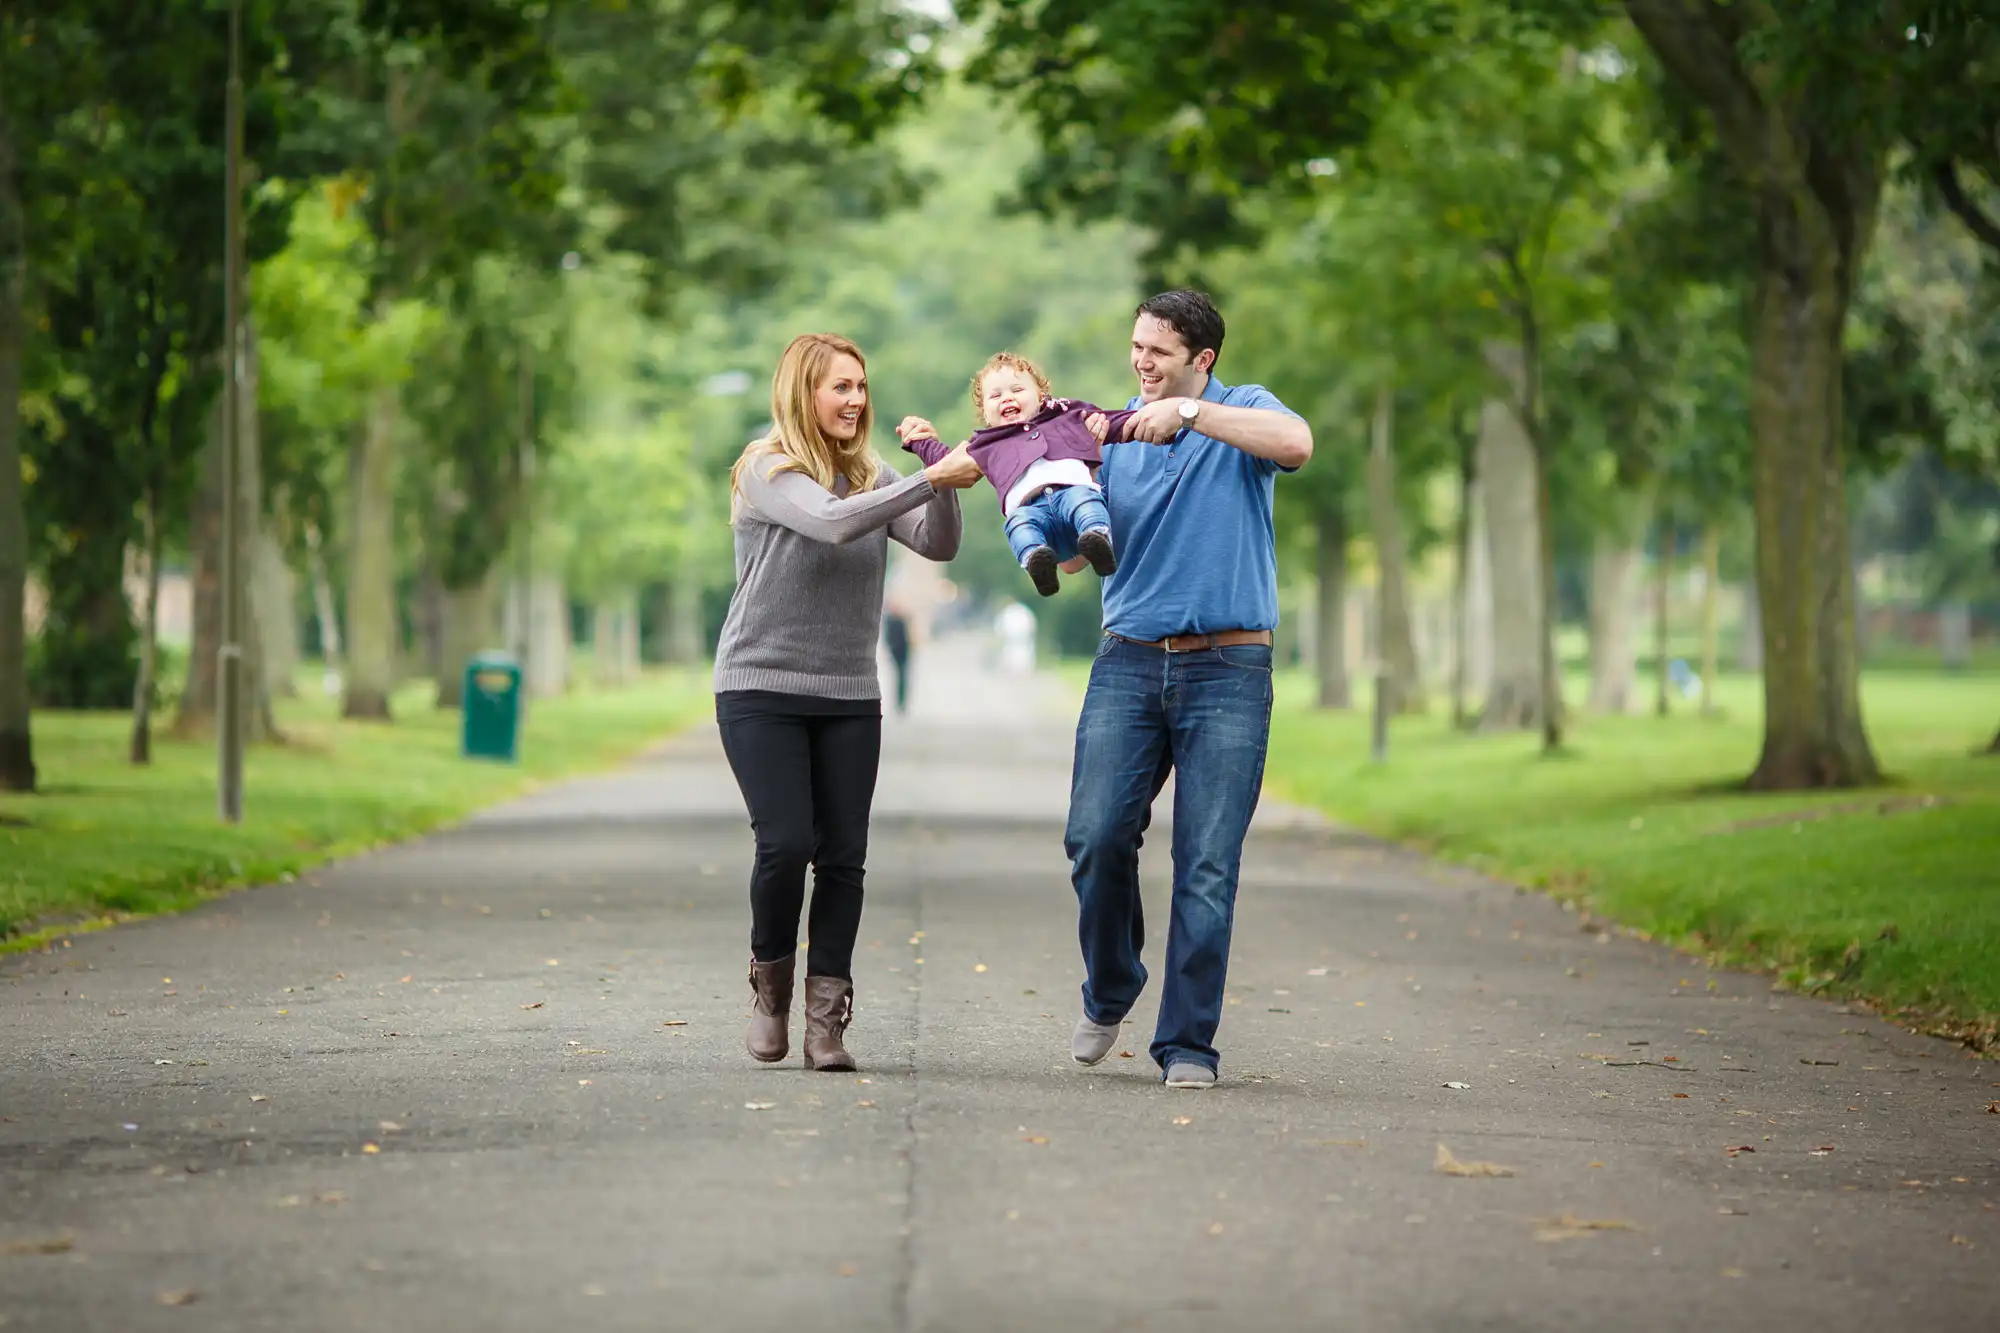 A family with a young child joyfully playing, as they walk down a tree-lined park path.